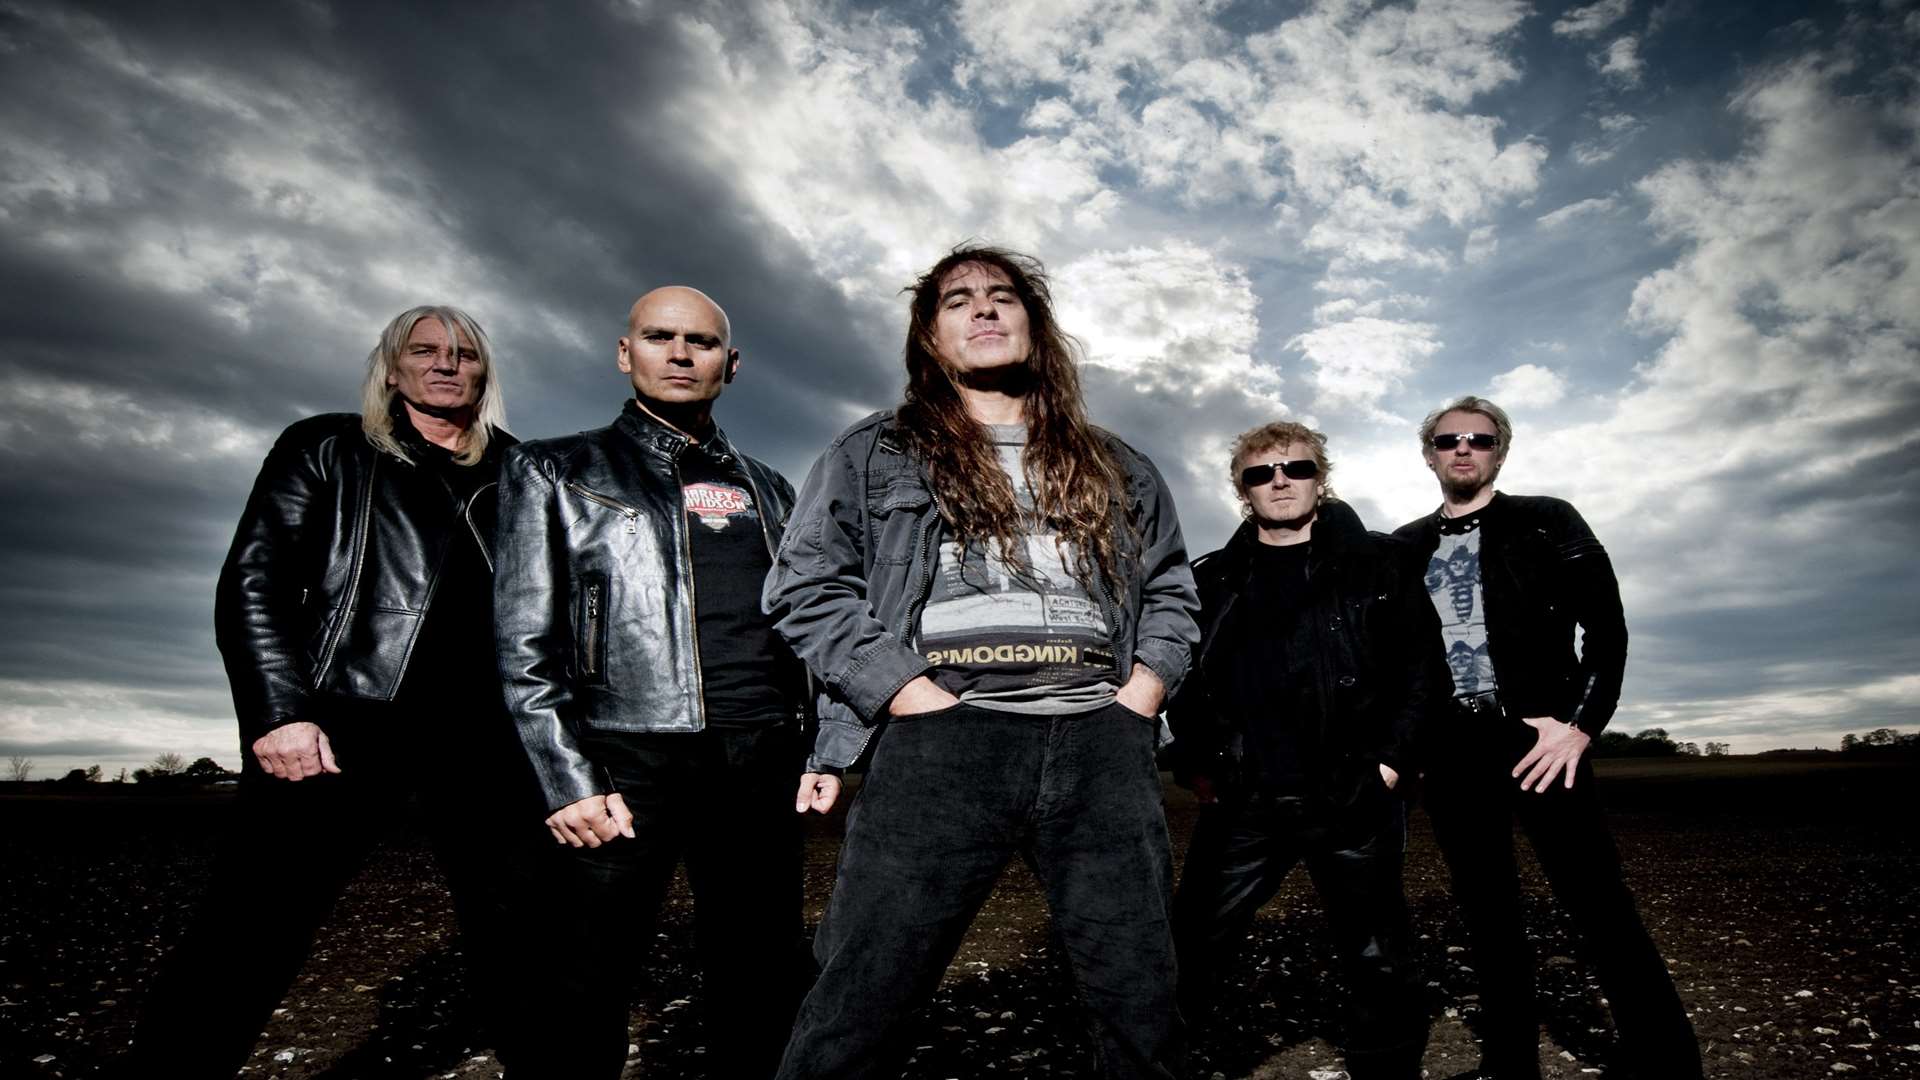 British Lion, led by Steve Harris from Iron Maiden